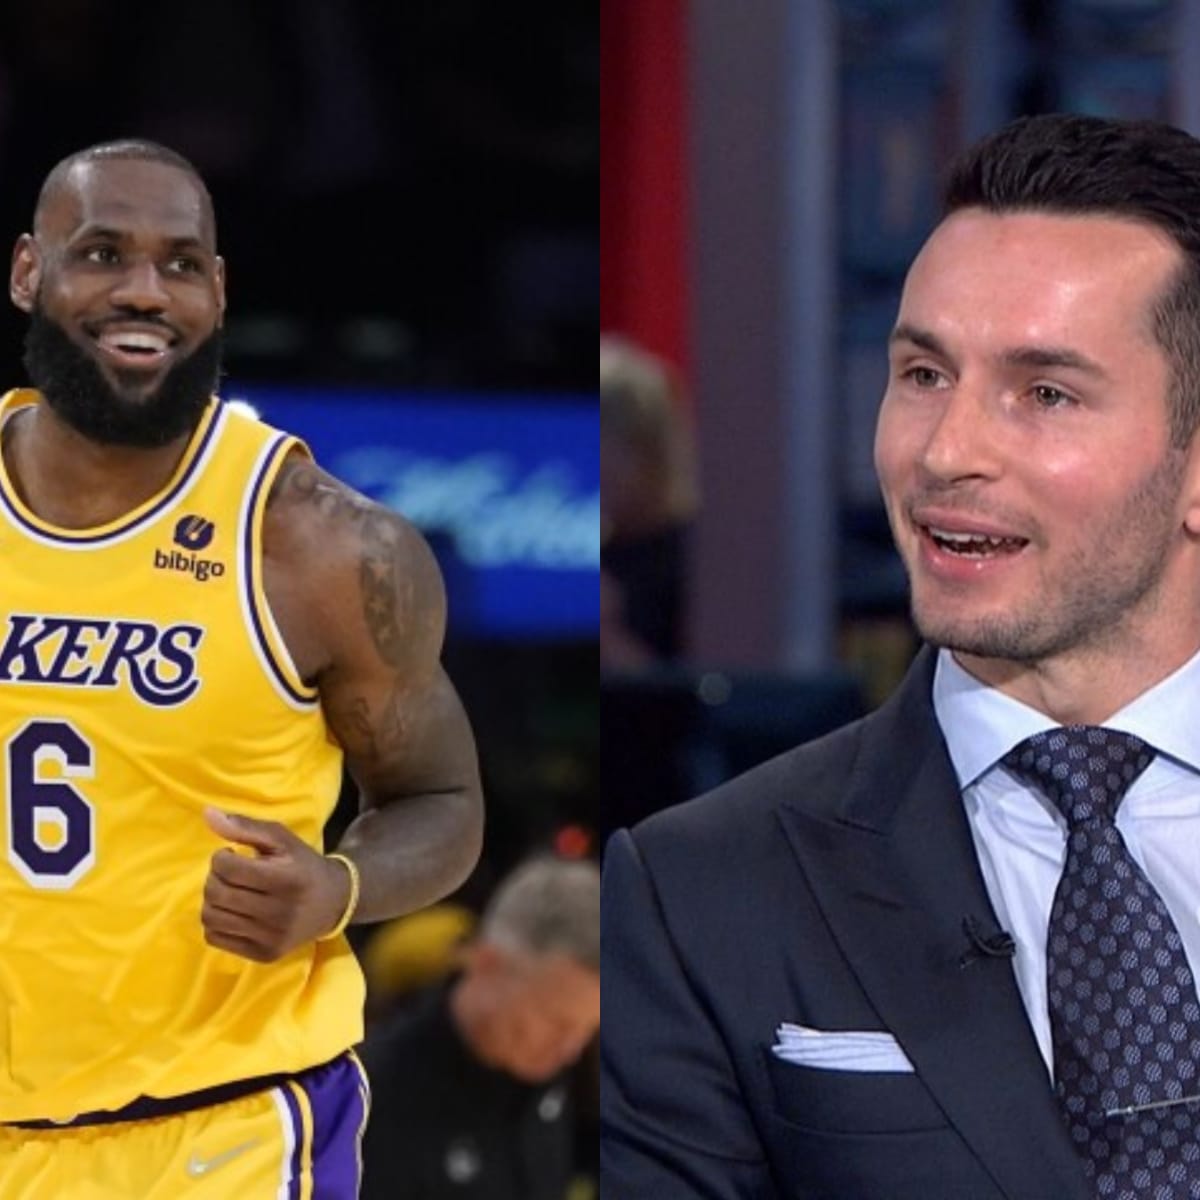 JJ Redick vouches for LeBron James to make it into the 2023 MVP